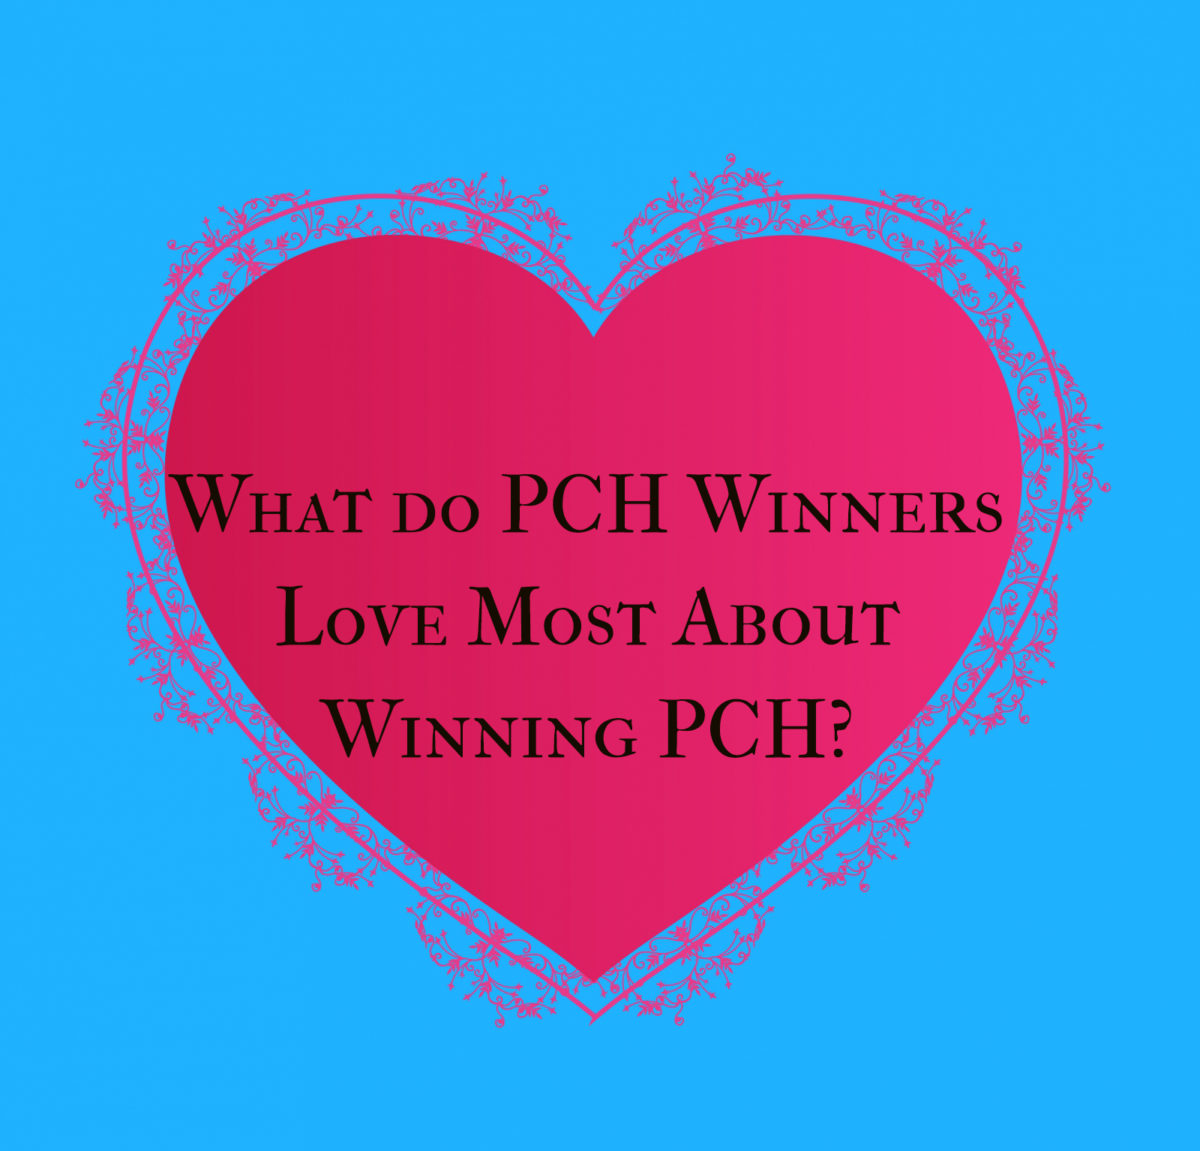 #WinnerWednesday: What Do PCH Winners Love Most about PCH?